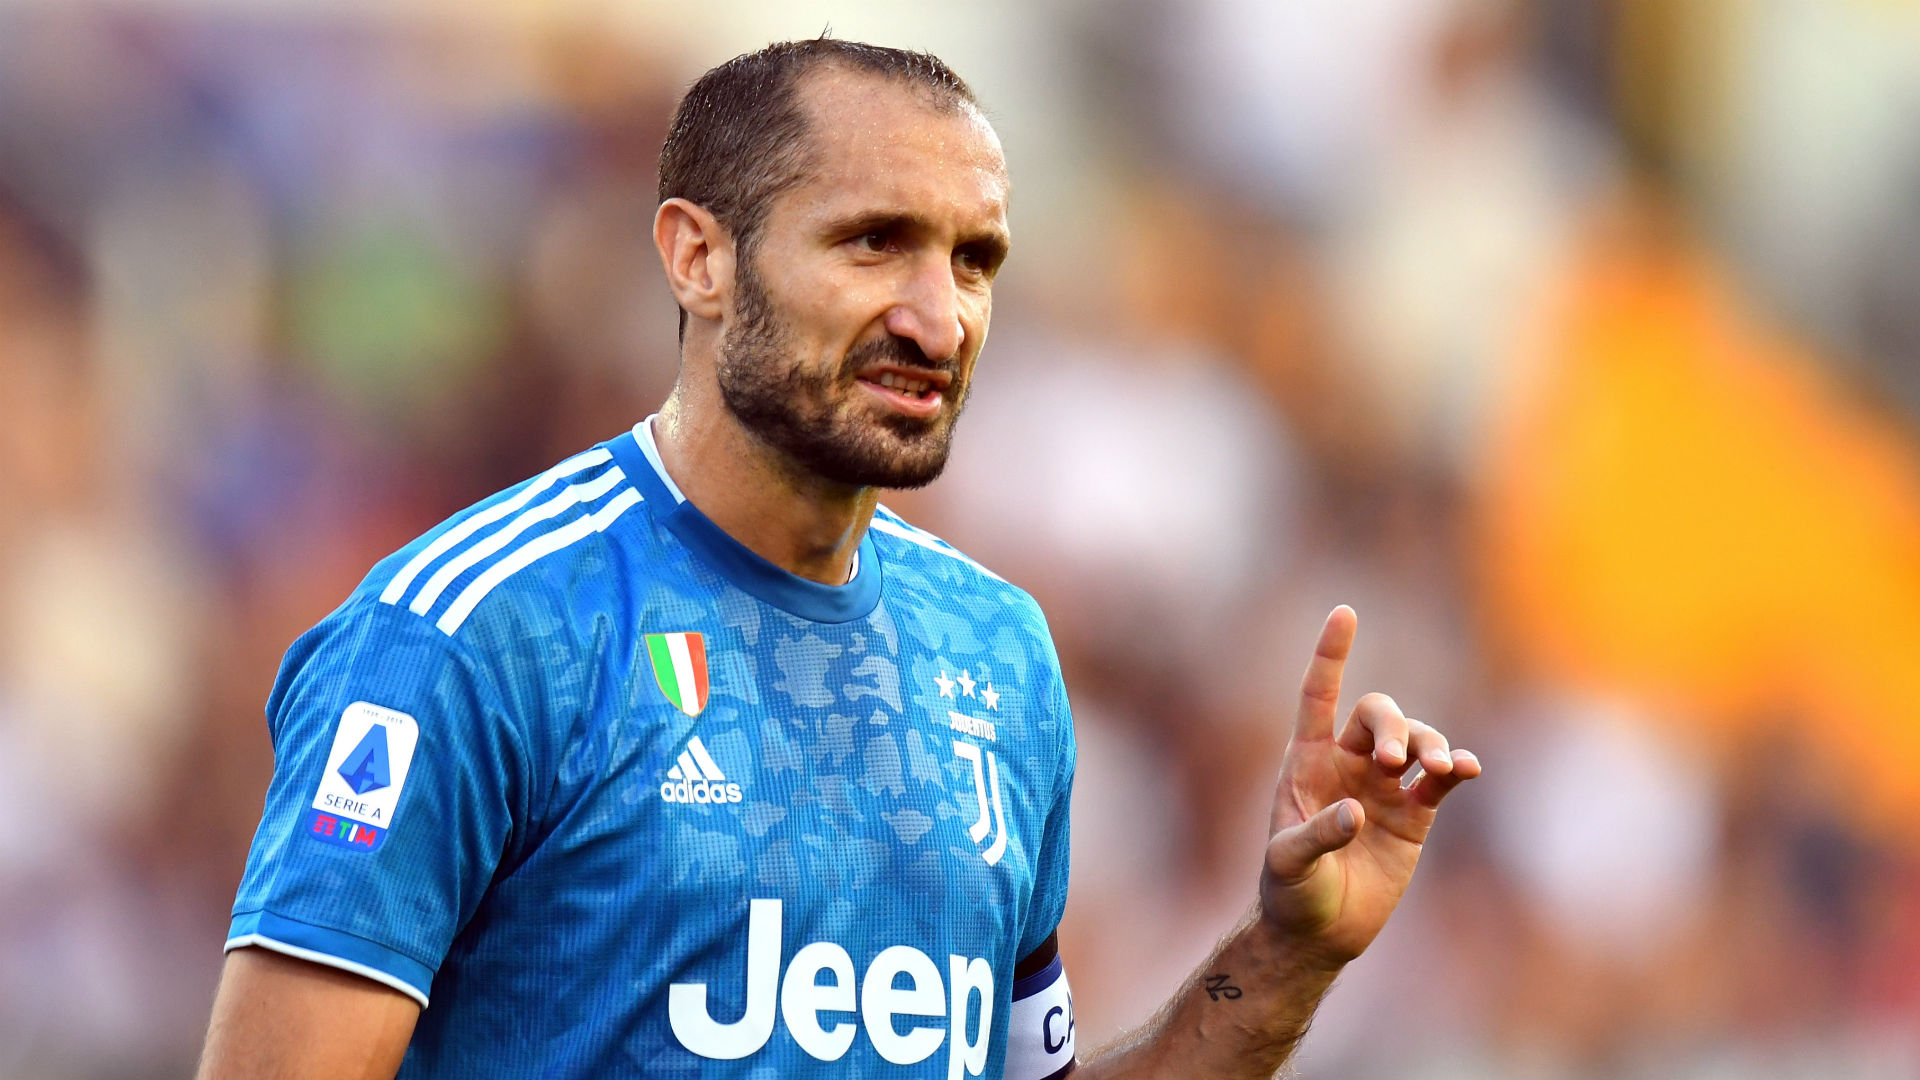 Giorgio Chiellini talked about the racism theme